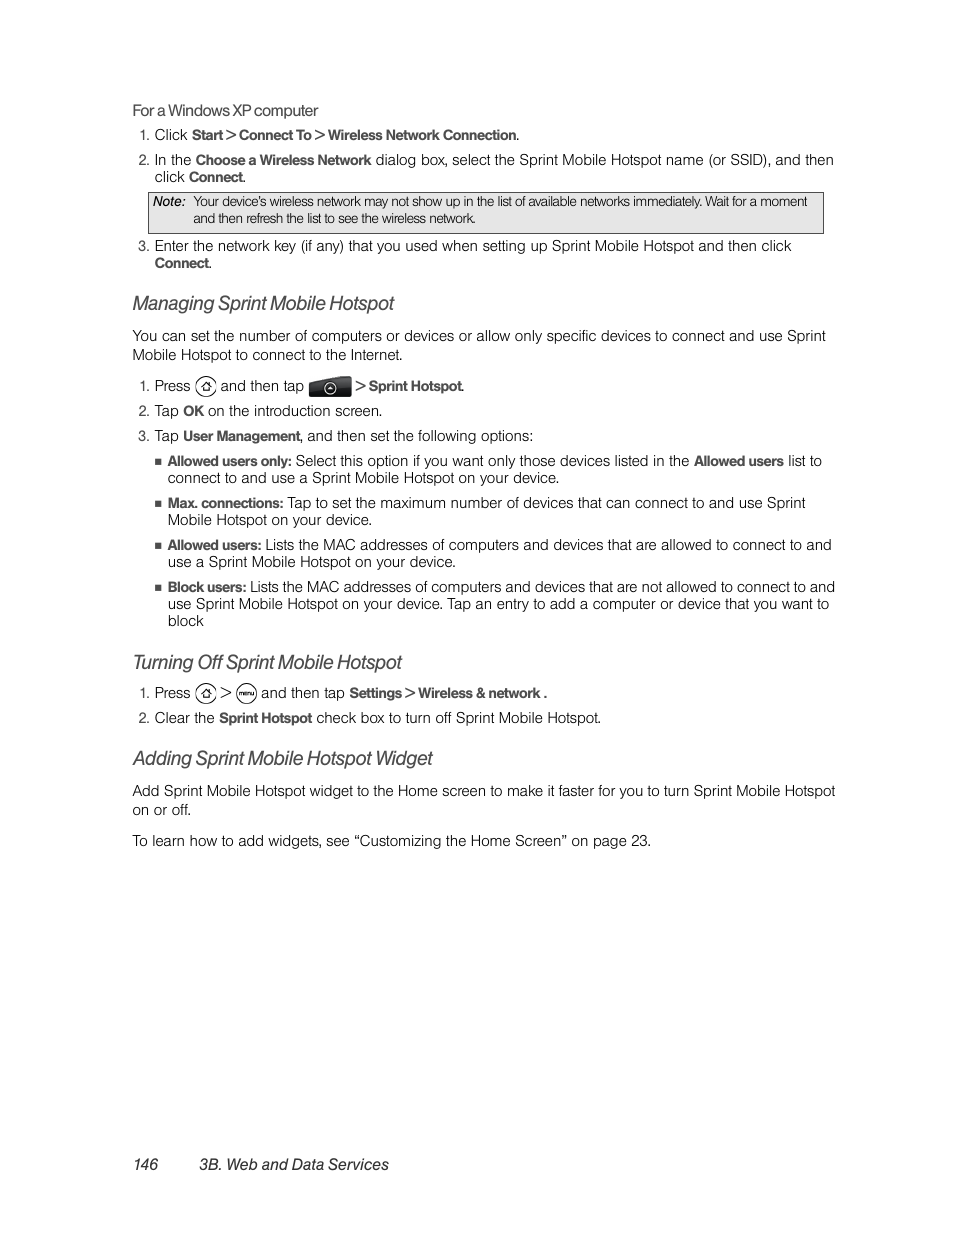 Managing sprint mobile hotspot, Turning off sprint mobile hotspot, Adding sprint mobile hotspot widget | HTC EVO 4G User Manual | Page 156 / 197